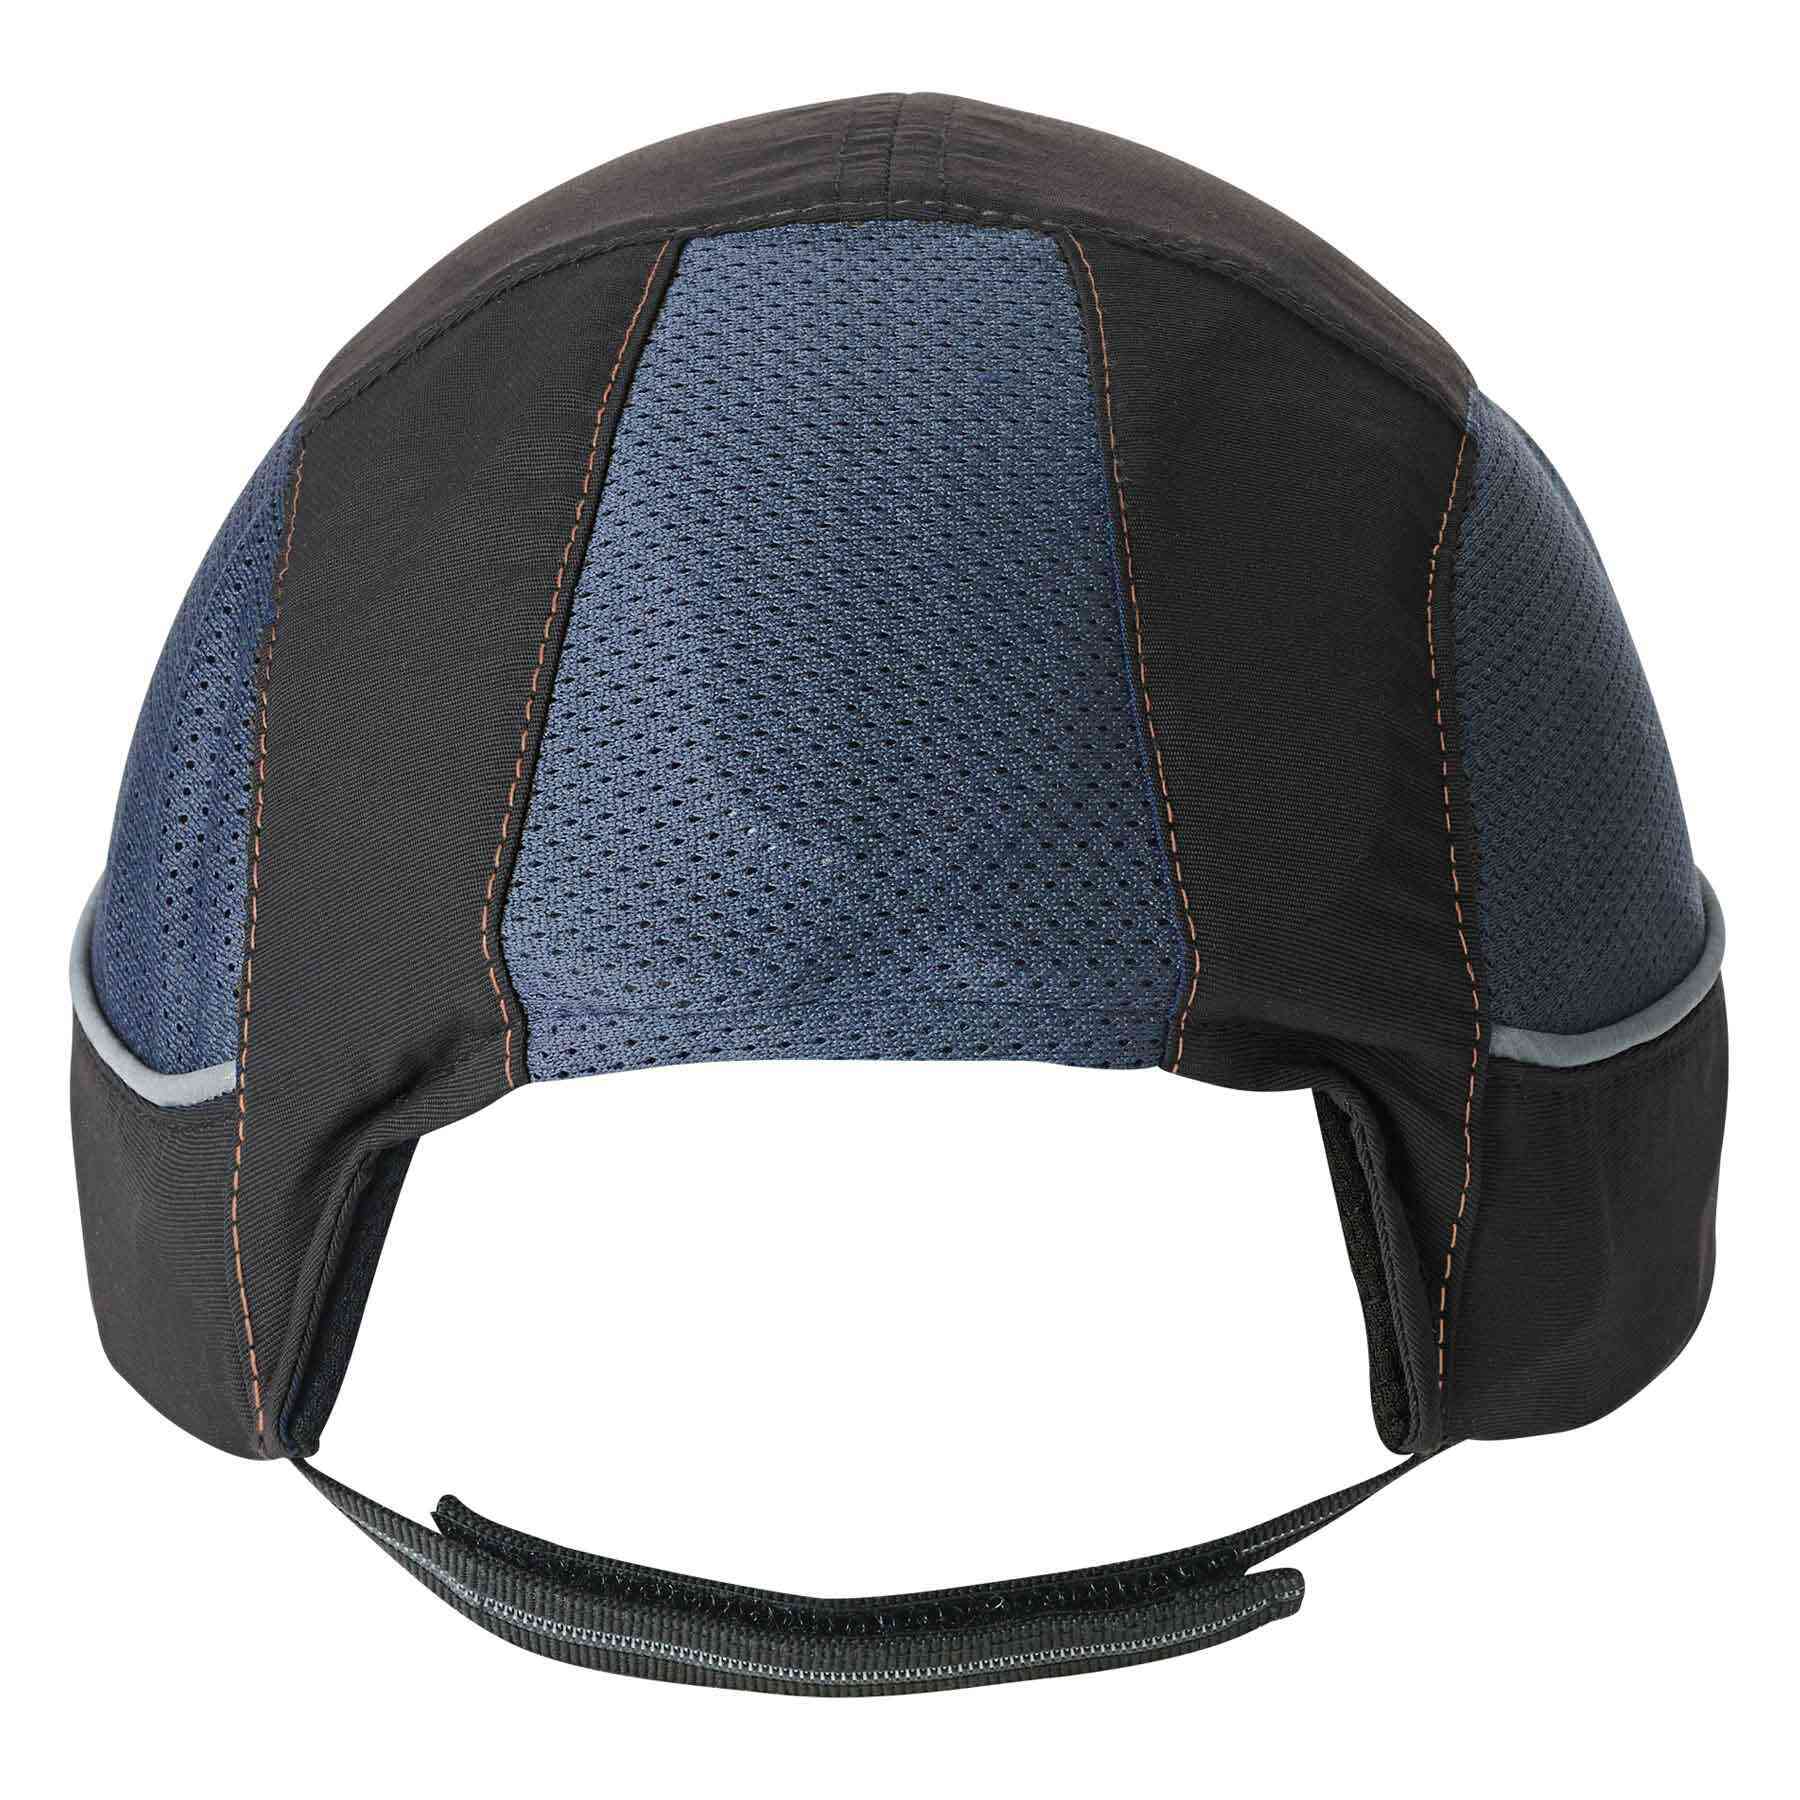 Baseball Hat Style Skullerz 8950 Breathable Head Protection Safety Bump Cap Long Brim